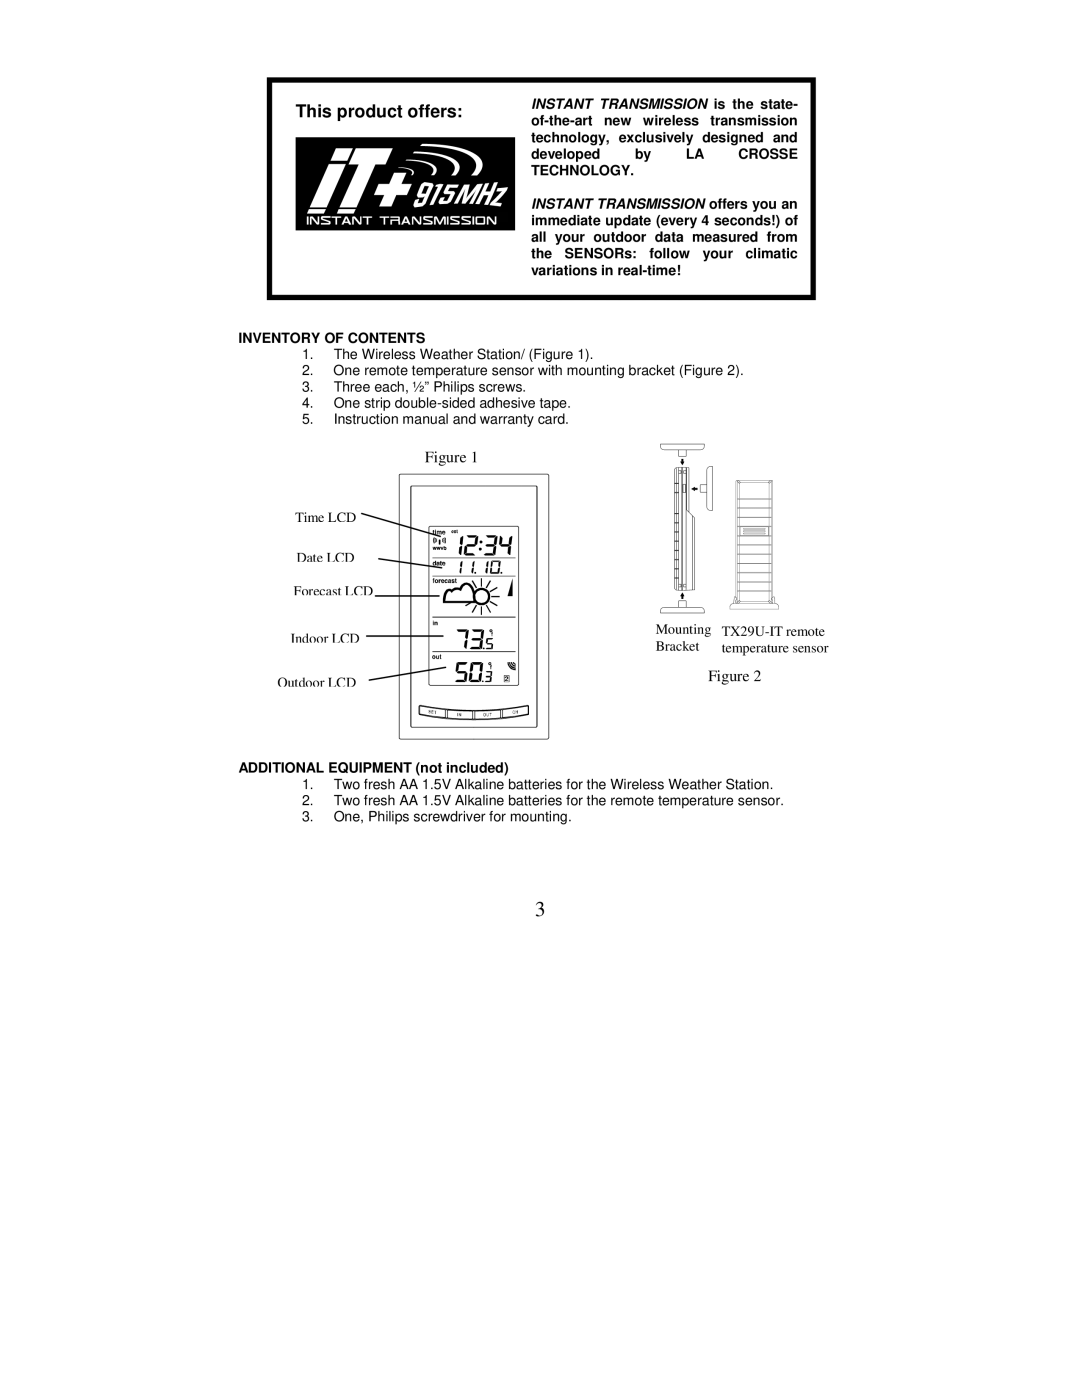 La Crosse Technology WS-9077TWC-IT instruction manual This product offers, Inventory of Contents 